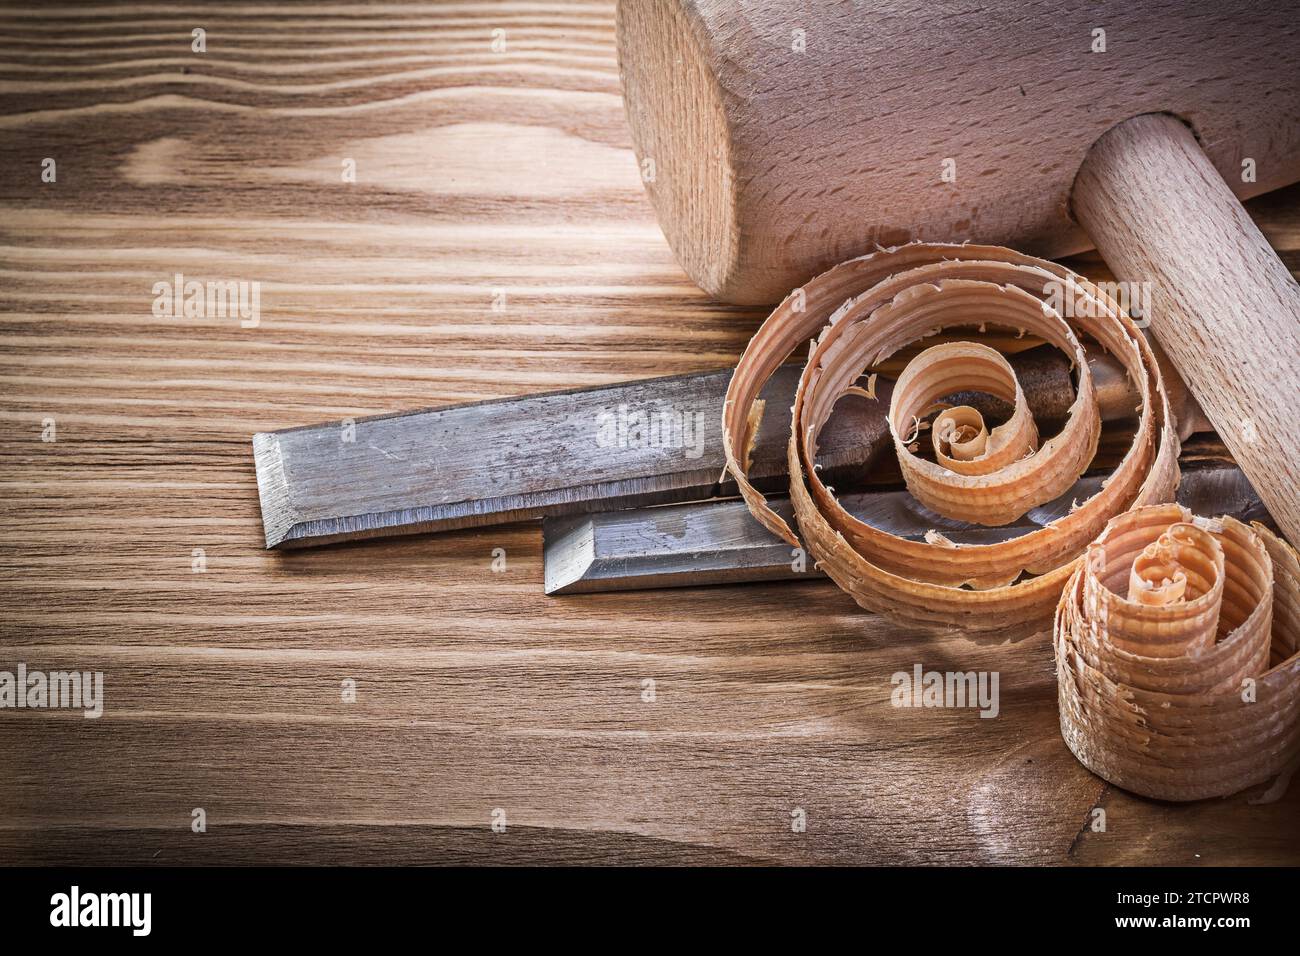 Lump hammer fixed chisel curled shavings on vintage wooden board Building concept Stock Photo